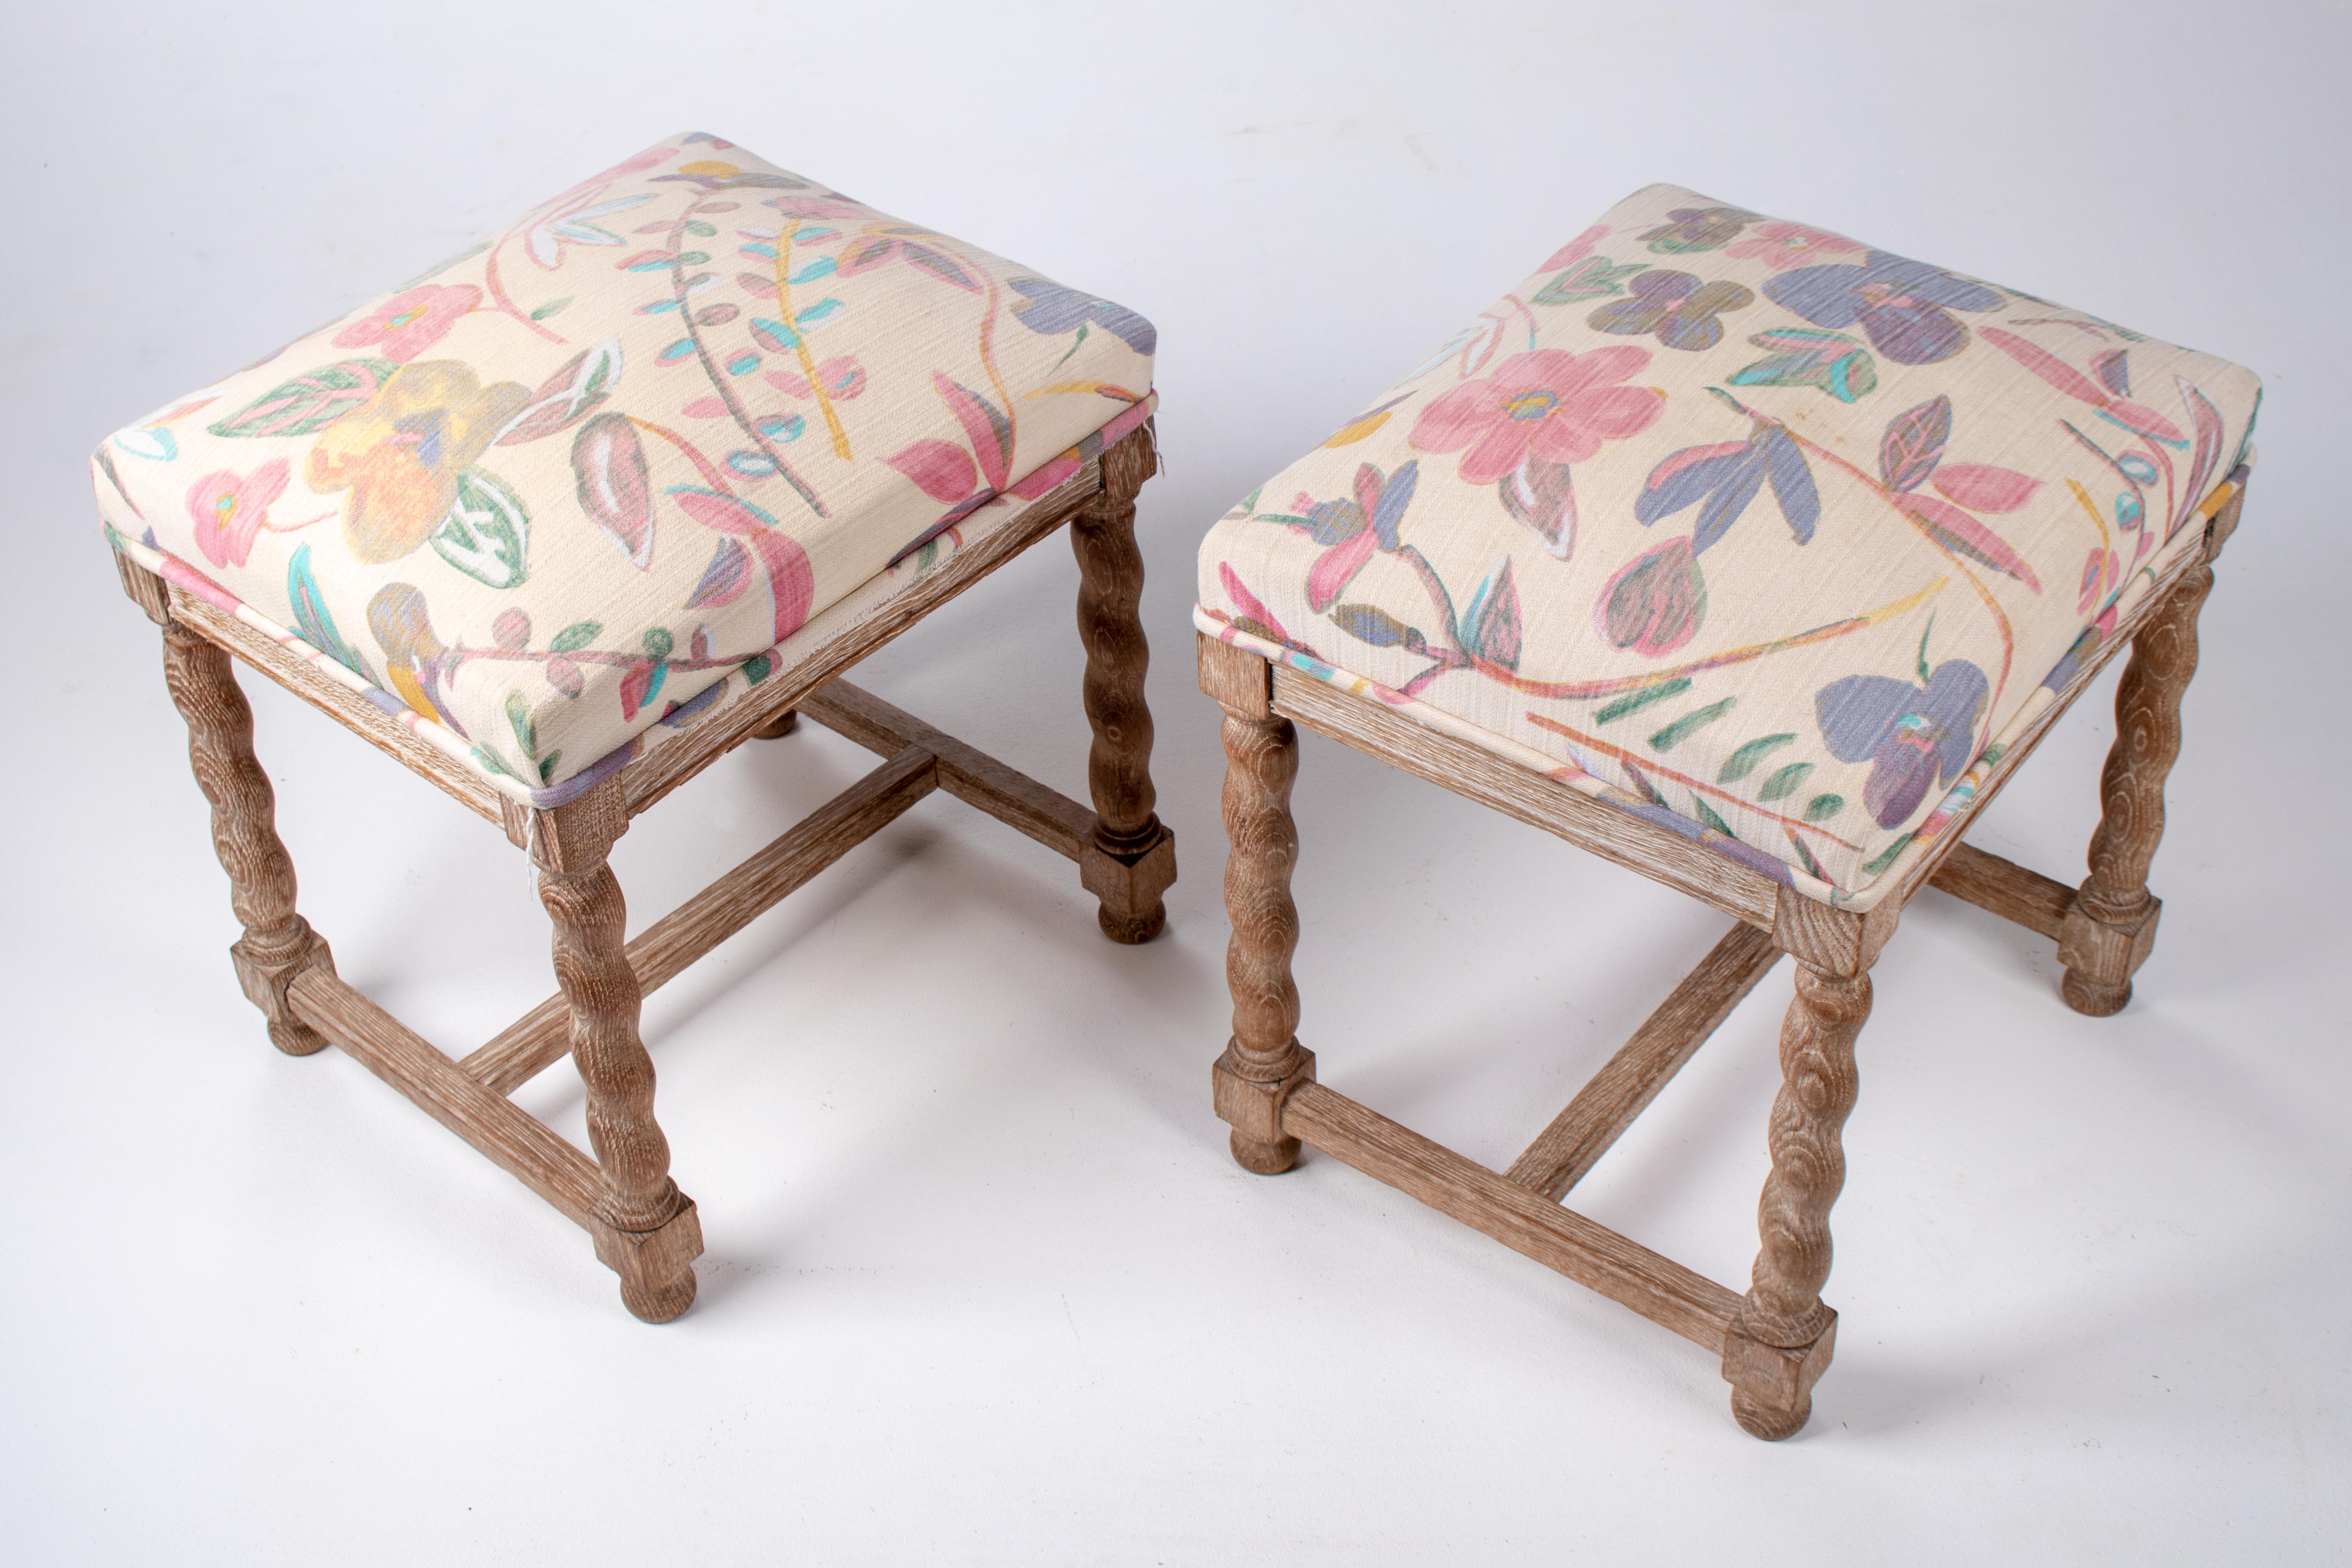 Pair of French Style Carved Wooden Upholstered Stools in Vintage Flower Pattern 1